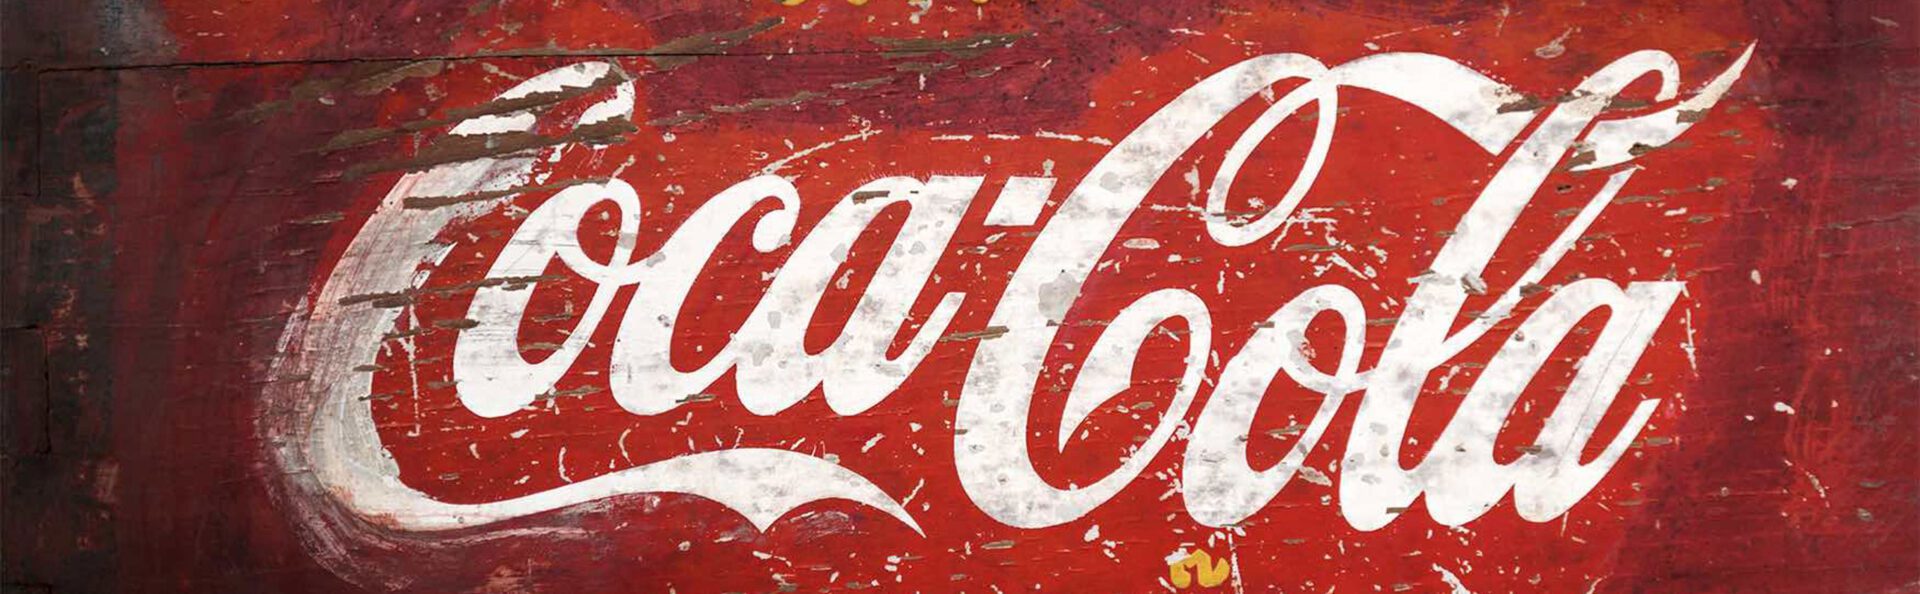 A close up of the coca cola logo on a wall